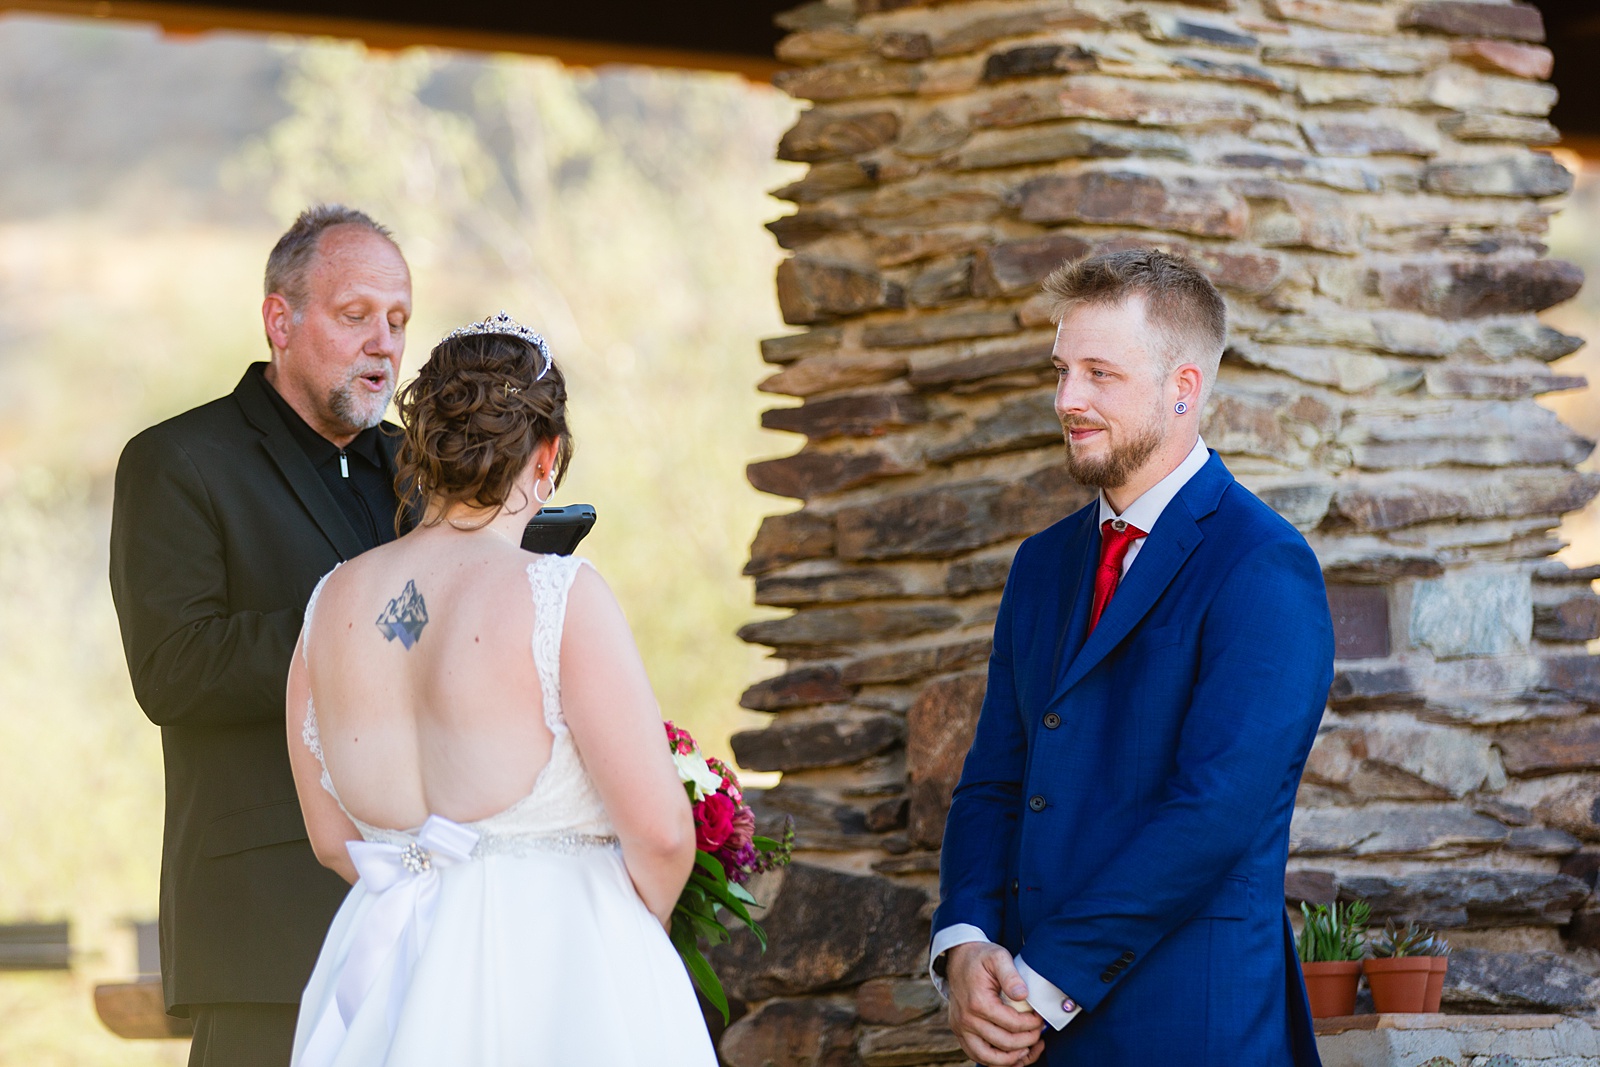 Groom looking at his bride during their wedding ceremony at intimate desert by Phoenix wedding photographer Juniper and Co Photography.